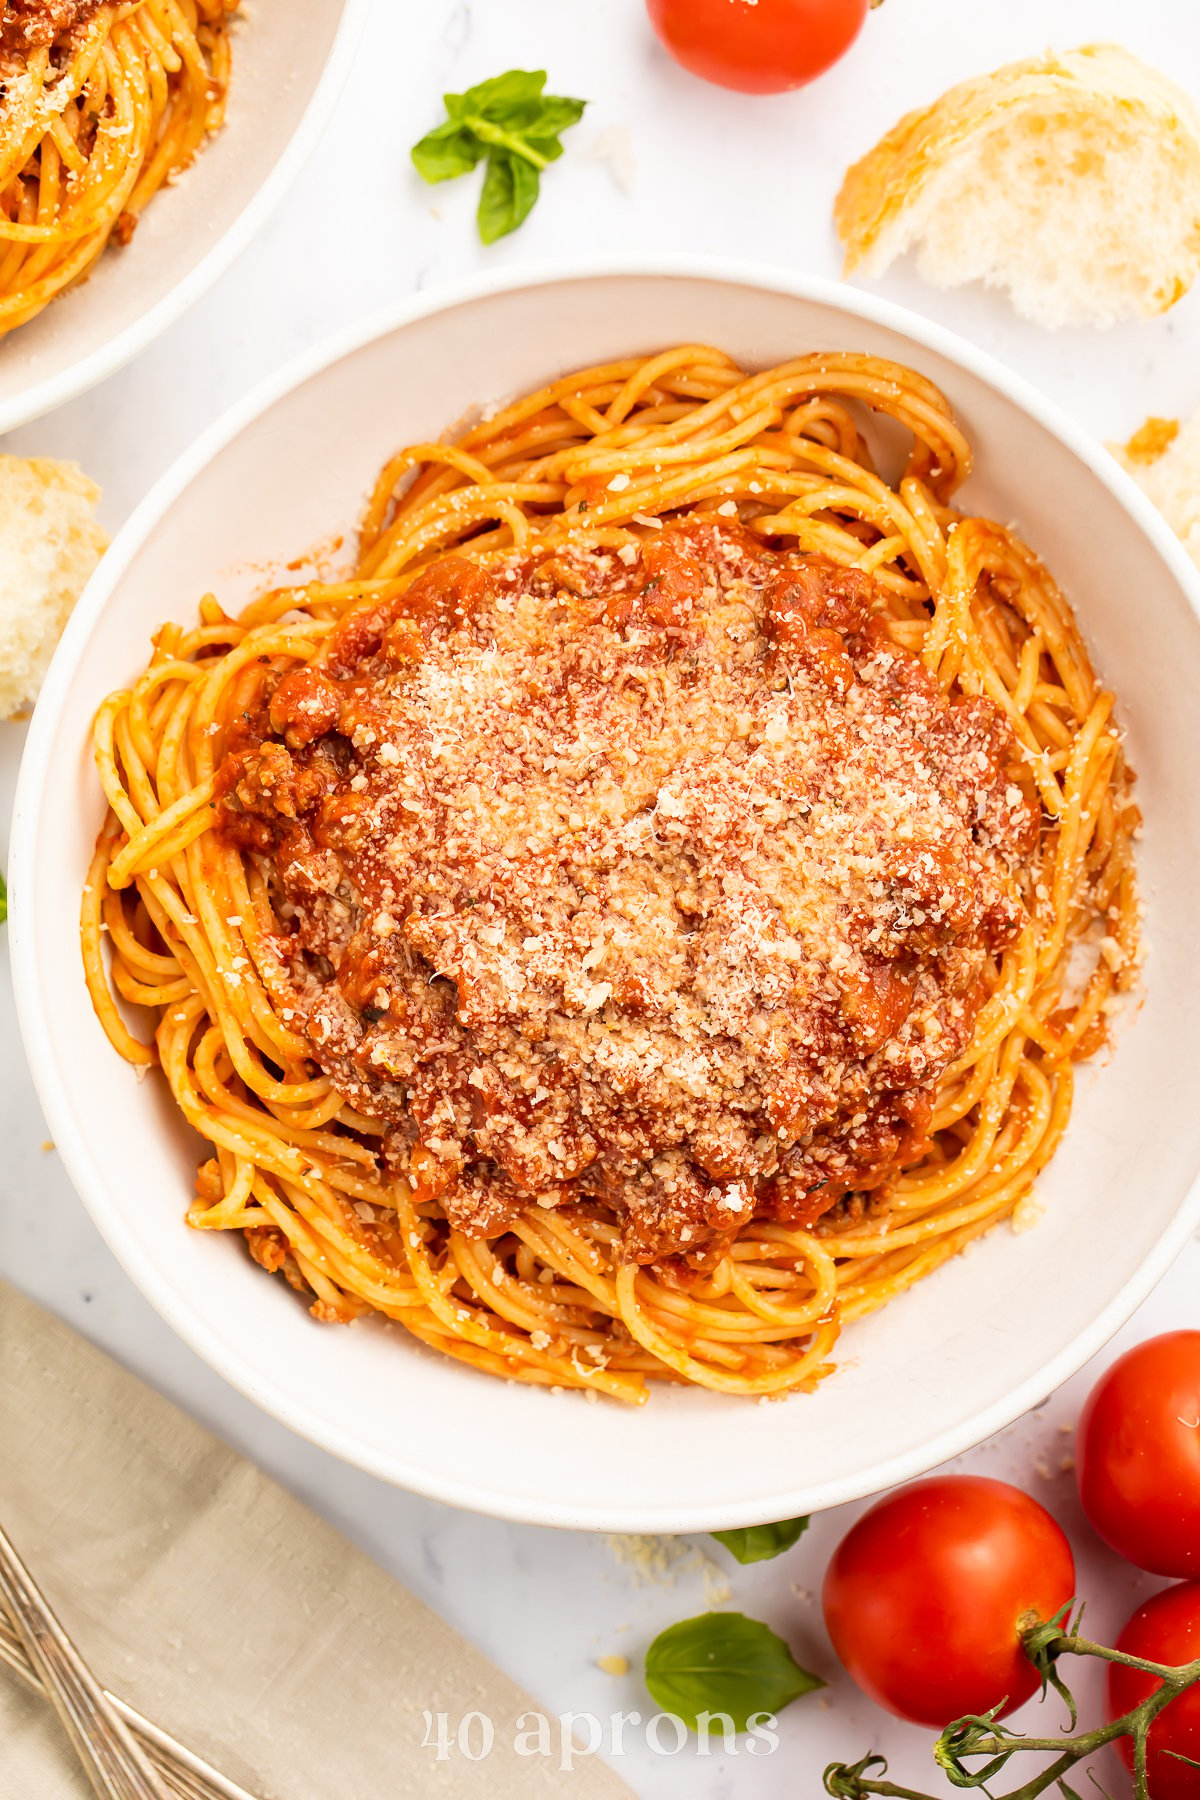 Overhead view of spaghetti noodles coated in rich, red Instant Pot spaghetti sauce in a large white pasta bowl on a table with tomatoes and silverware.